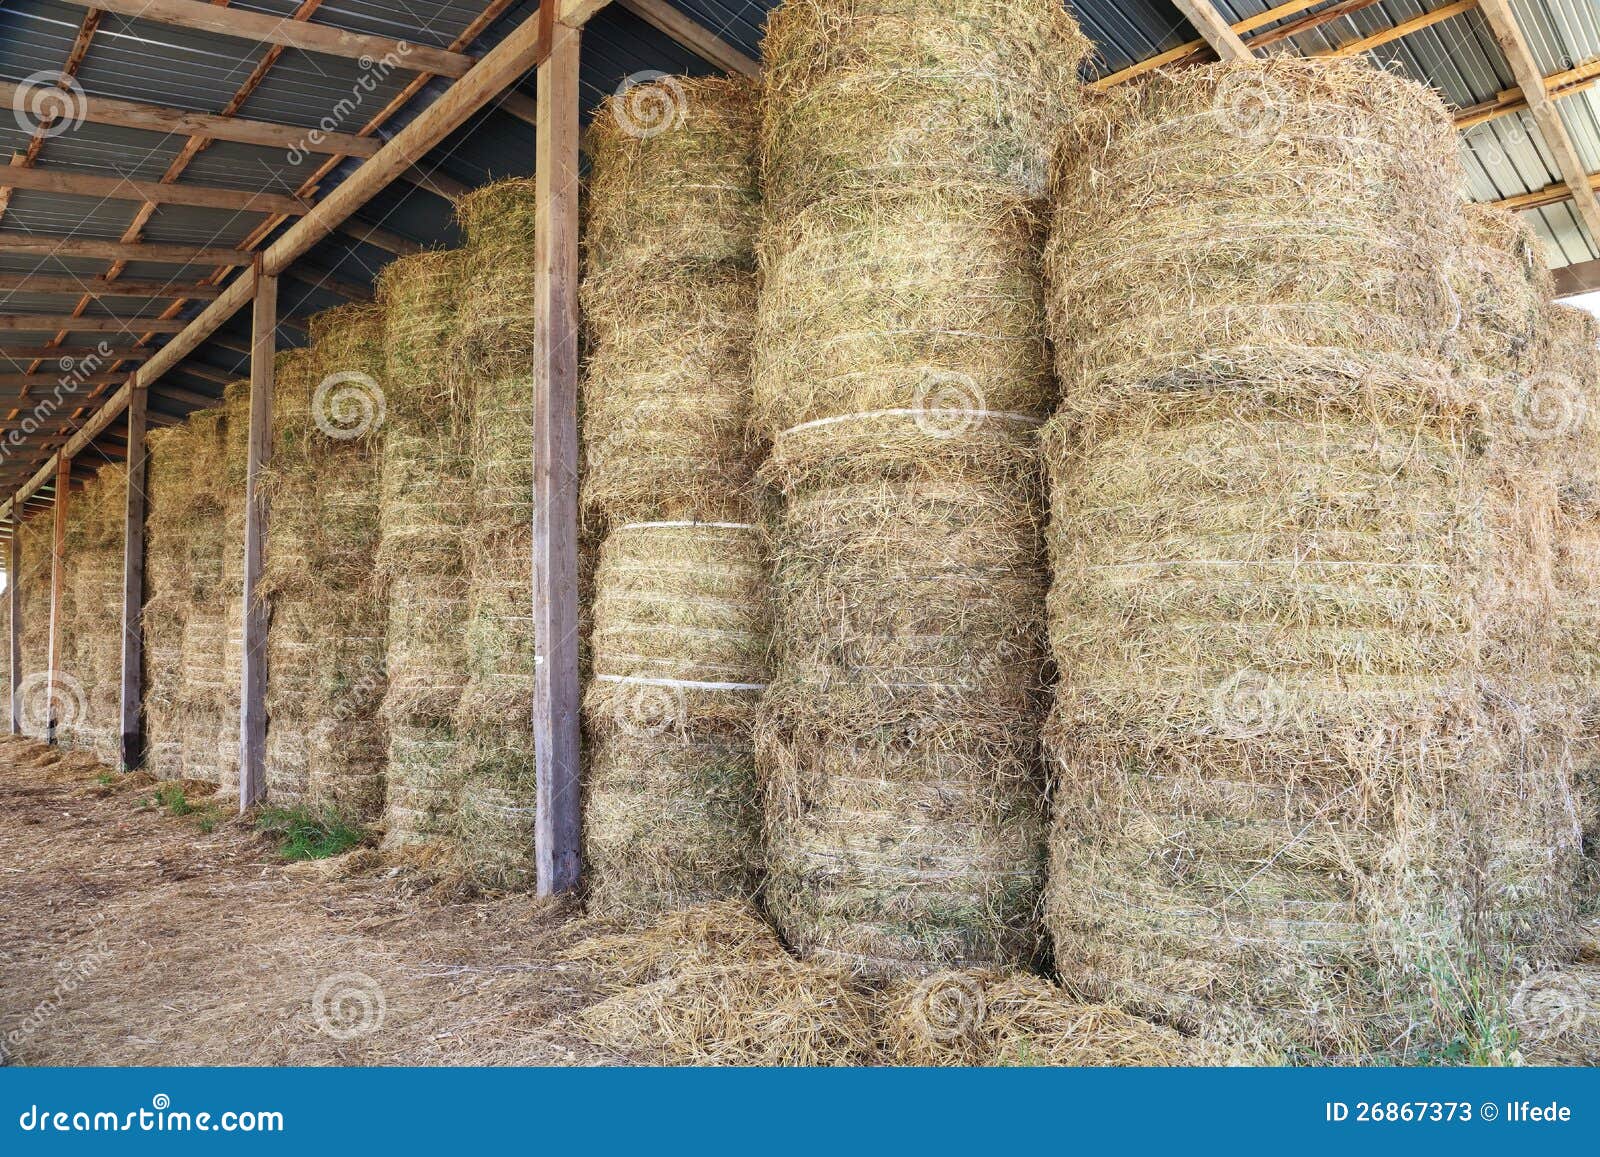 Hay Bale Stacked In Barn Stock Photos - Image: 26867373